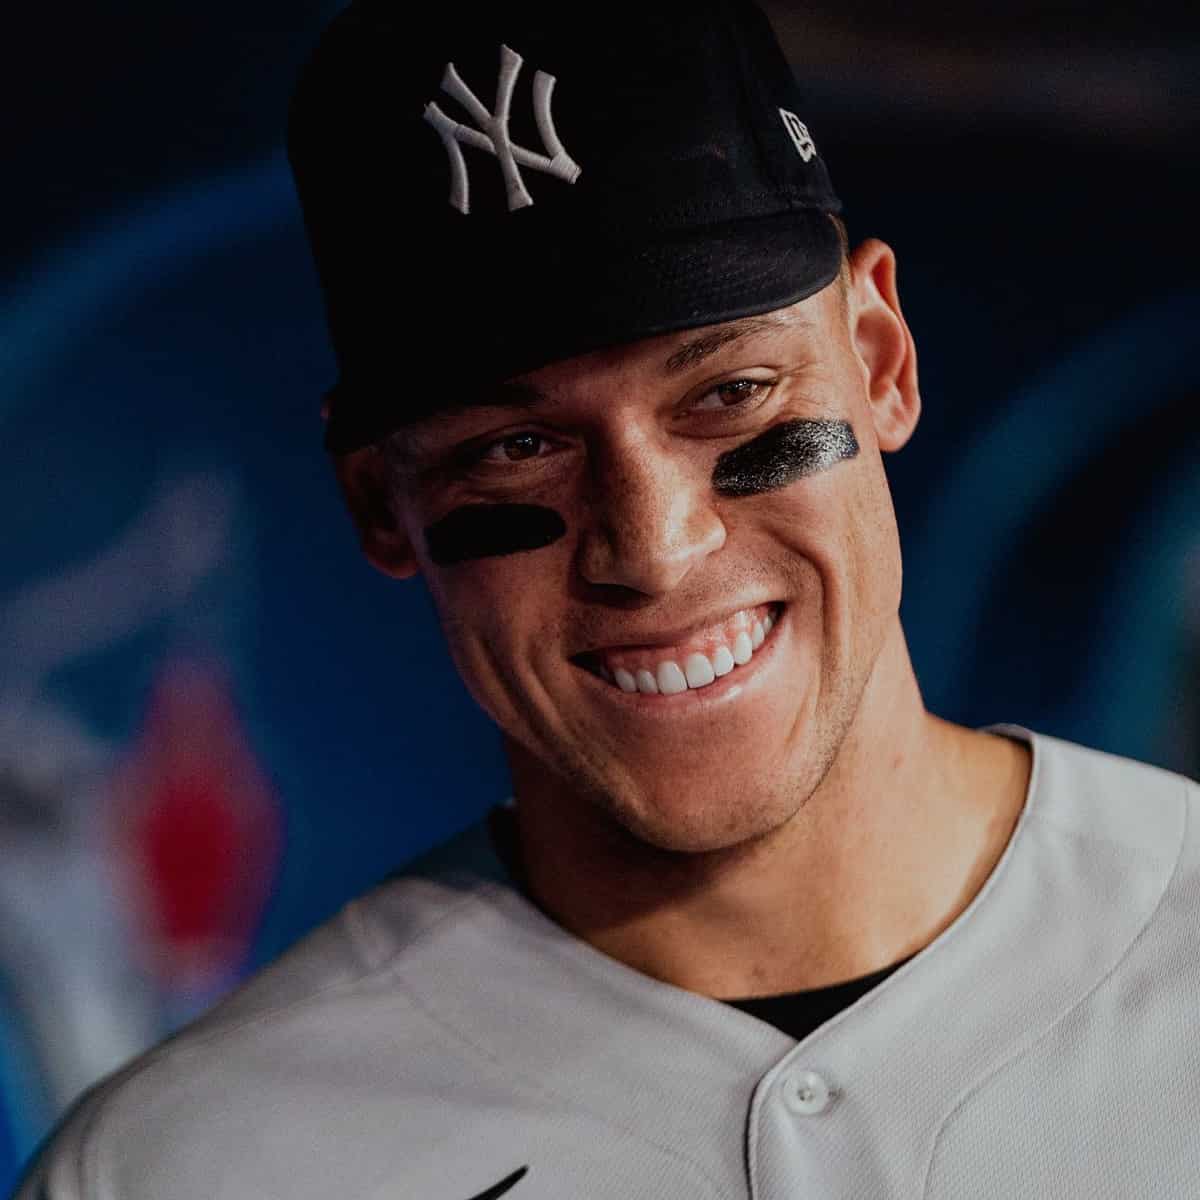 MLB - He's the Captain now! Aaron Judge is officially the